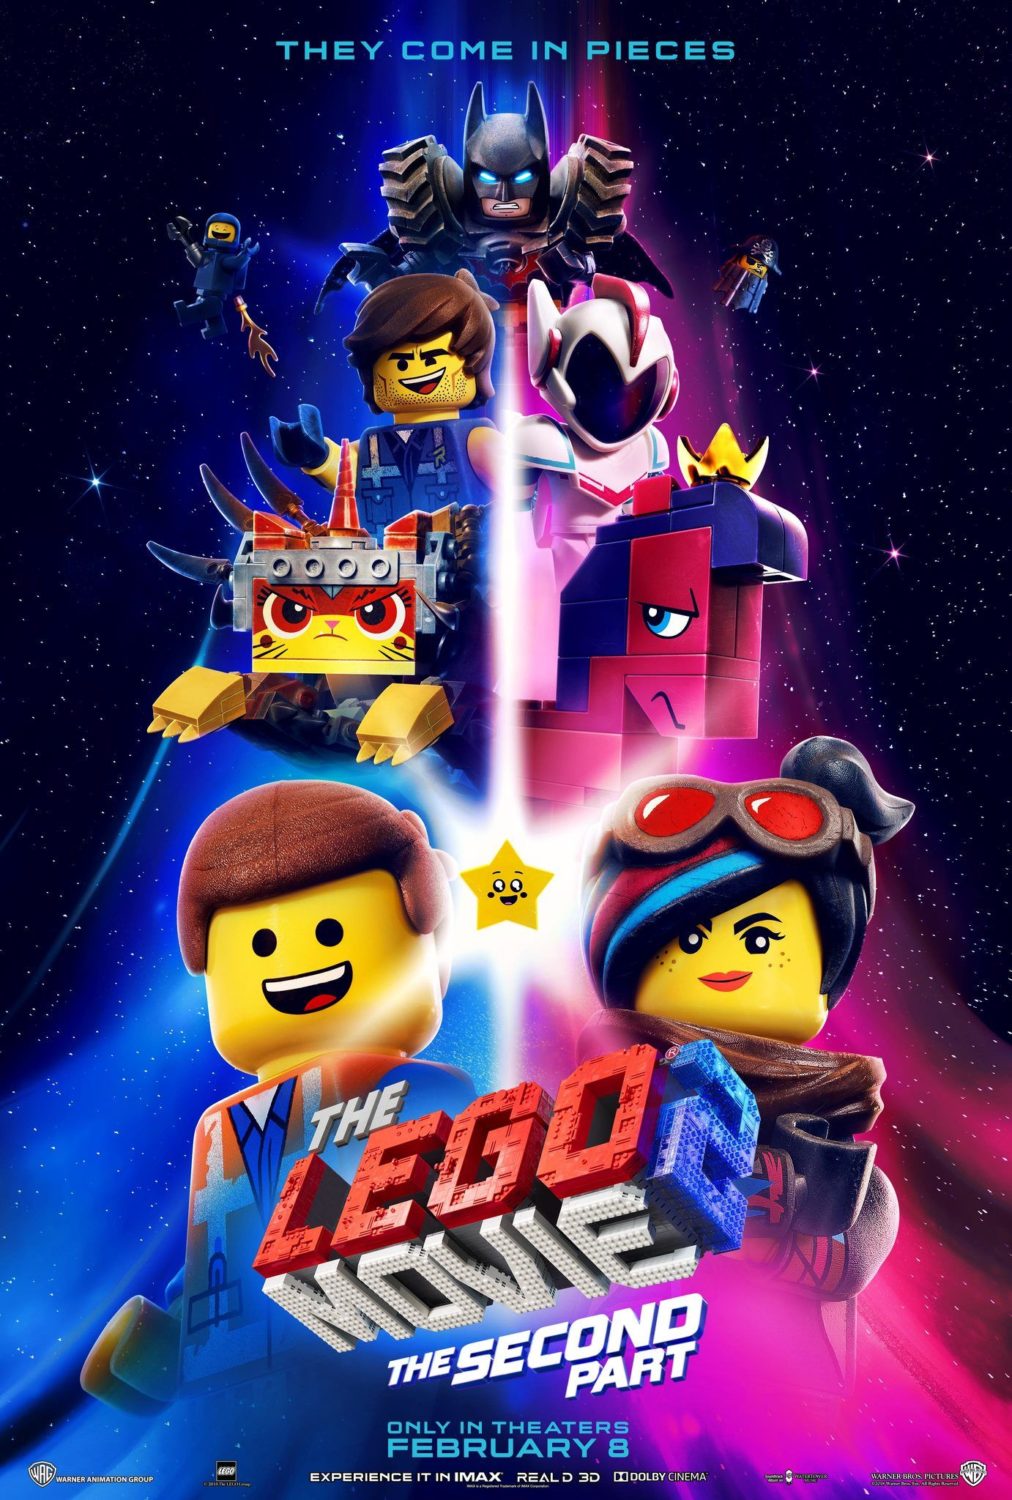 Lego Movie 2 poster from successful Lost Boys School of VFX alumni film credits for Visual Effects.